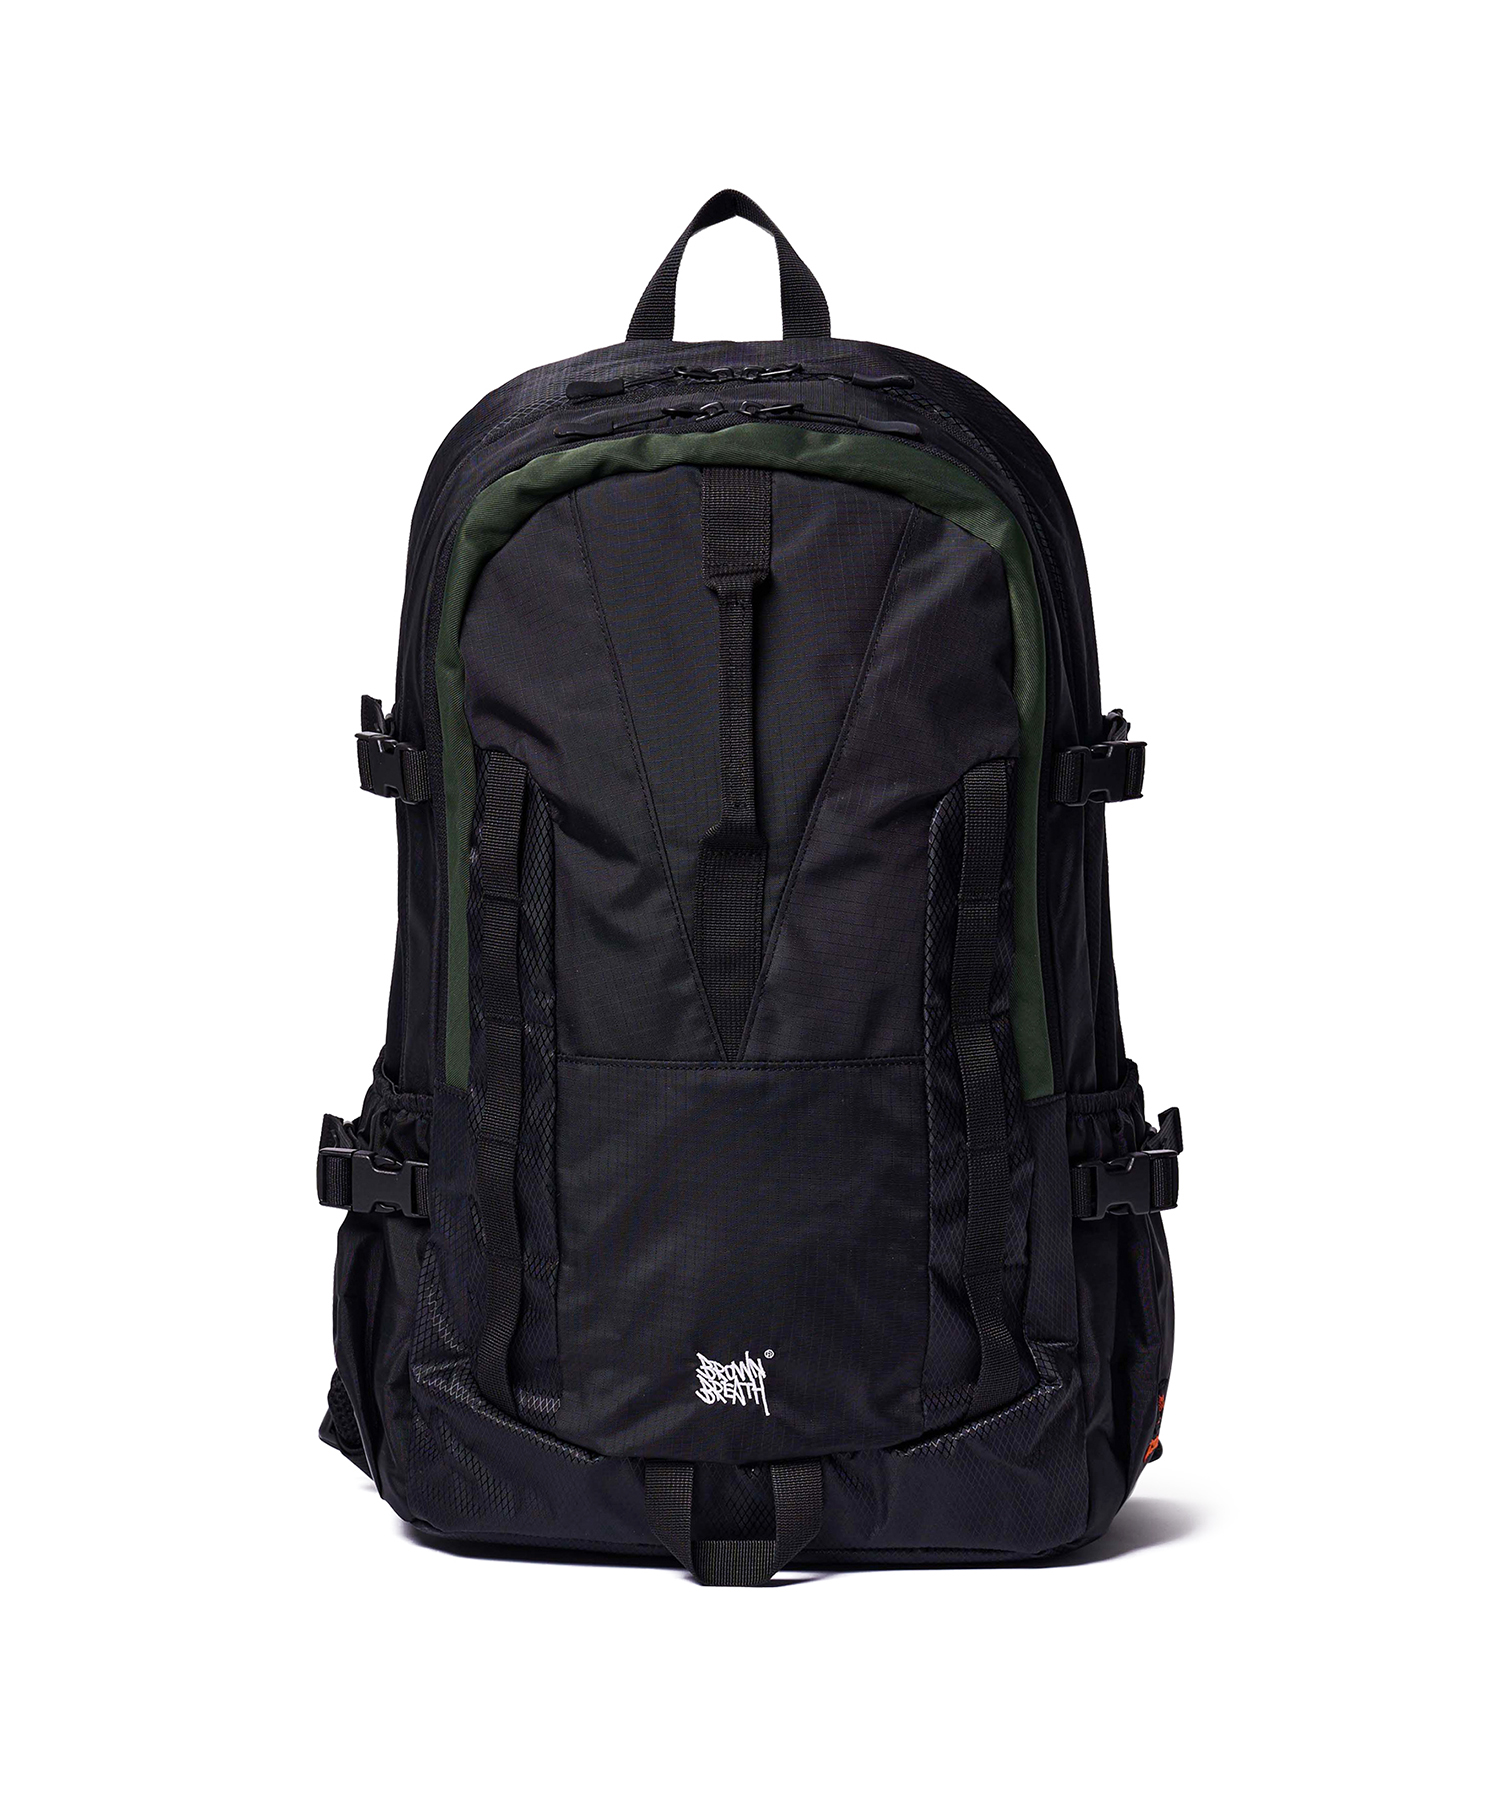 ACTS BACKPACK - BLACK